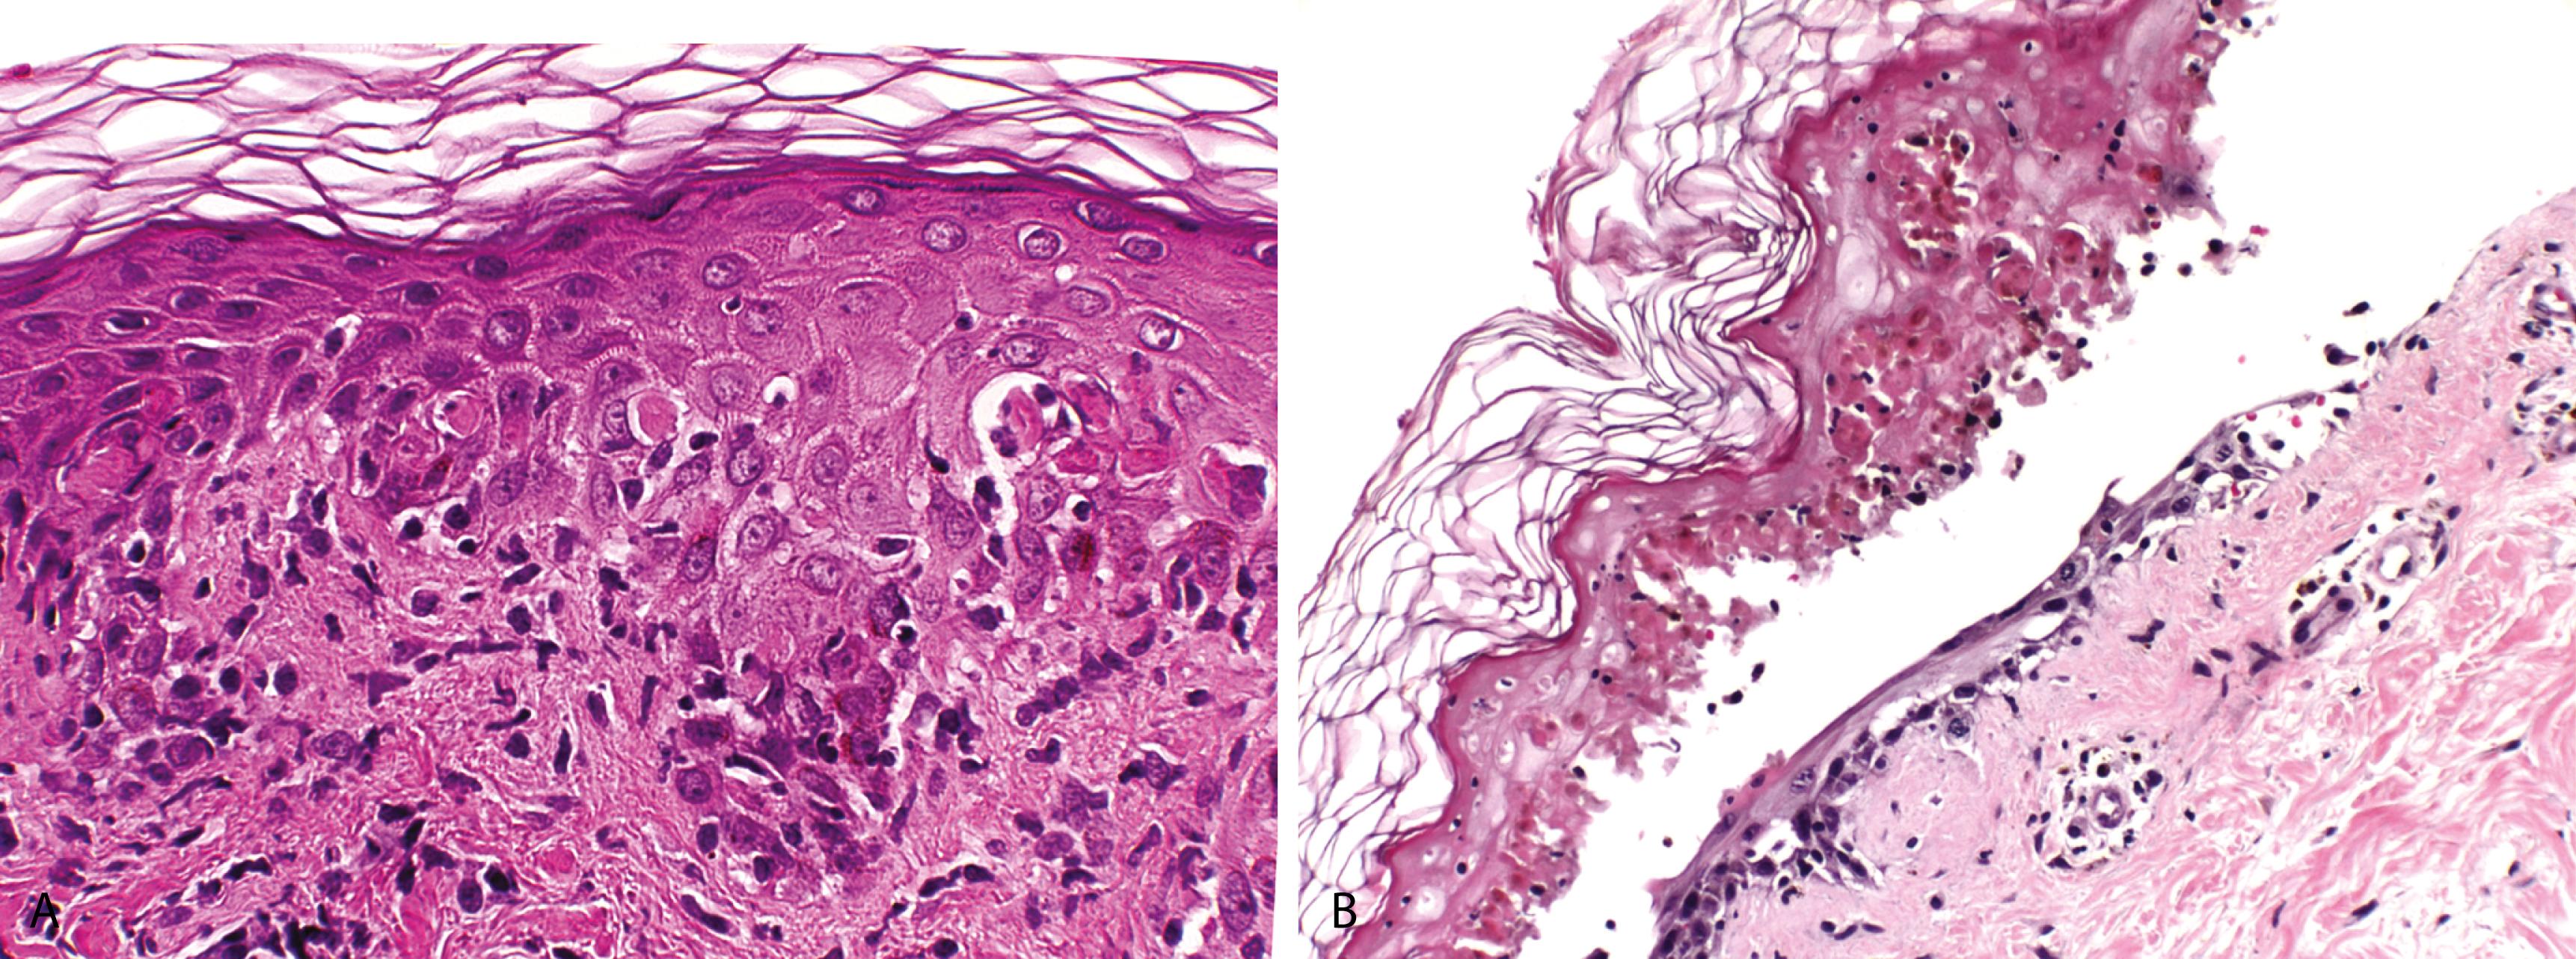 Figure 2.6, A, Erythema multiforme. Vacuolar alteration of the basal cell layer above which there are necrotic keratinocytes. B, Toxic epidermal necrolysis. Full-thickness epidermal necrosis with separation at the dermoepidermal junction. The cornified layer is unaltered, attesting to the acute nature of the process, and there is only a minimal inflammatory cell infiltrate.